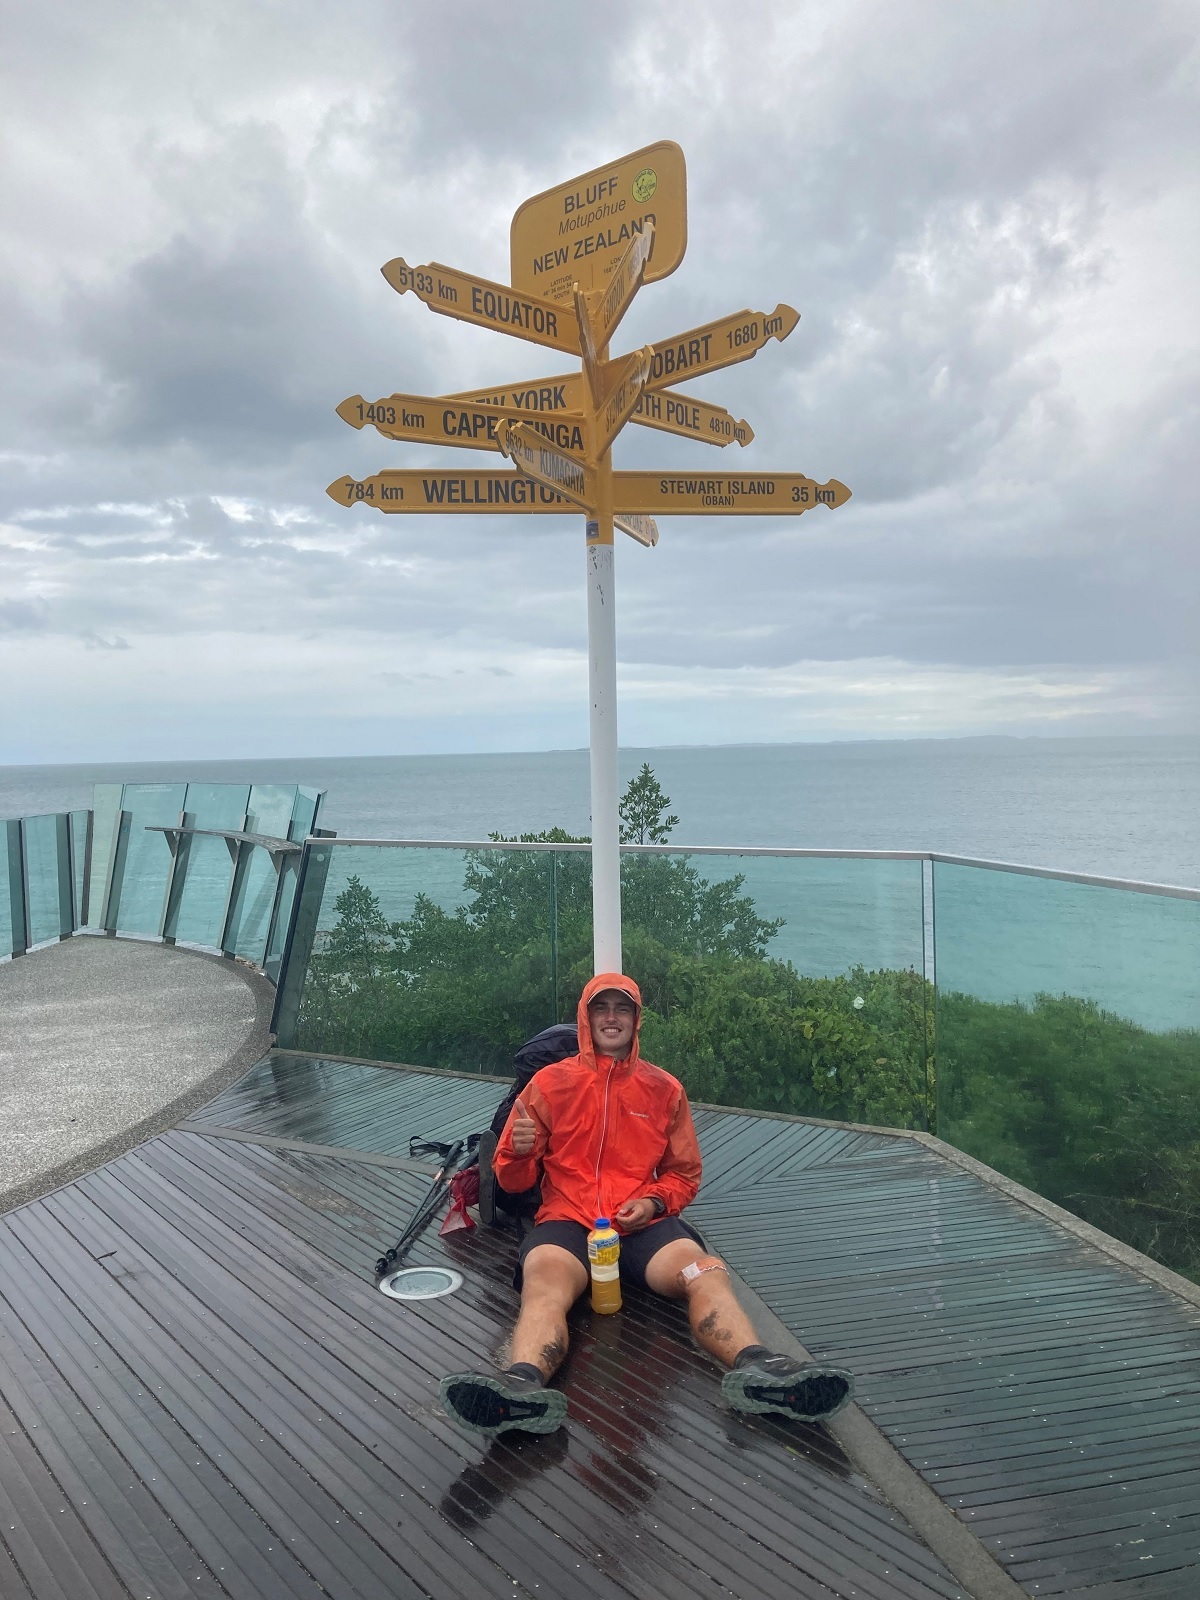 Mission accomplished - Shay Broomhall at the Bluff signpost